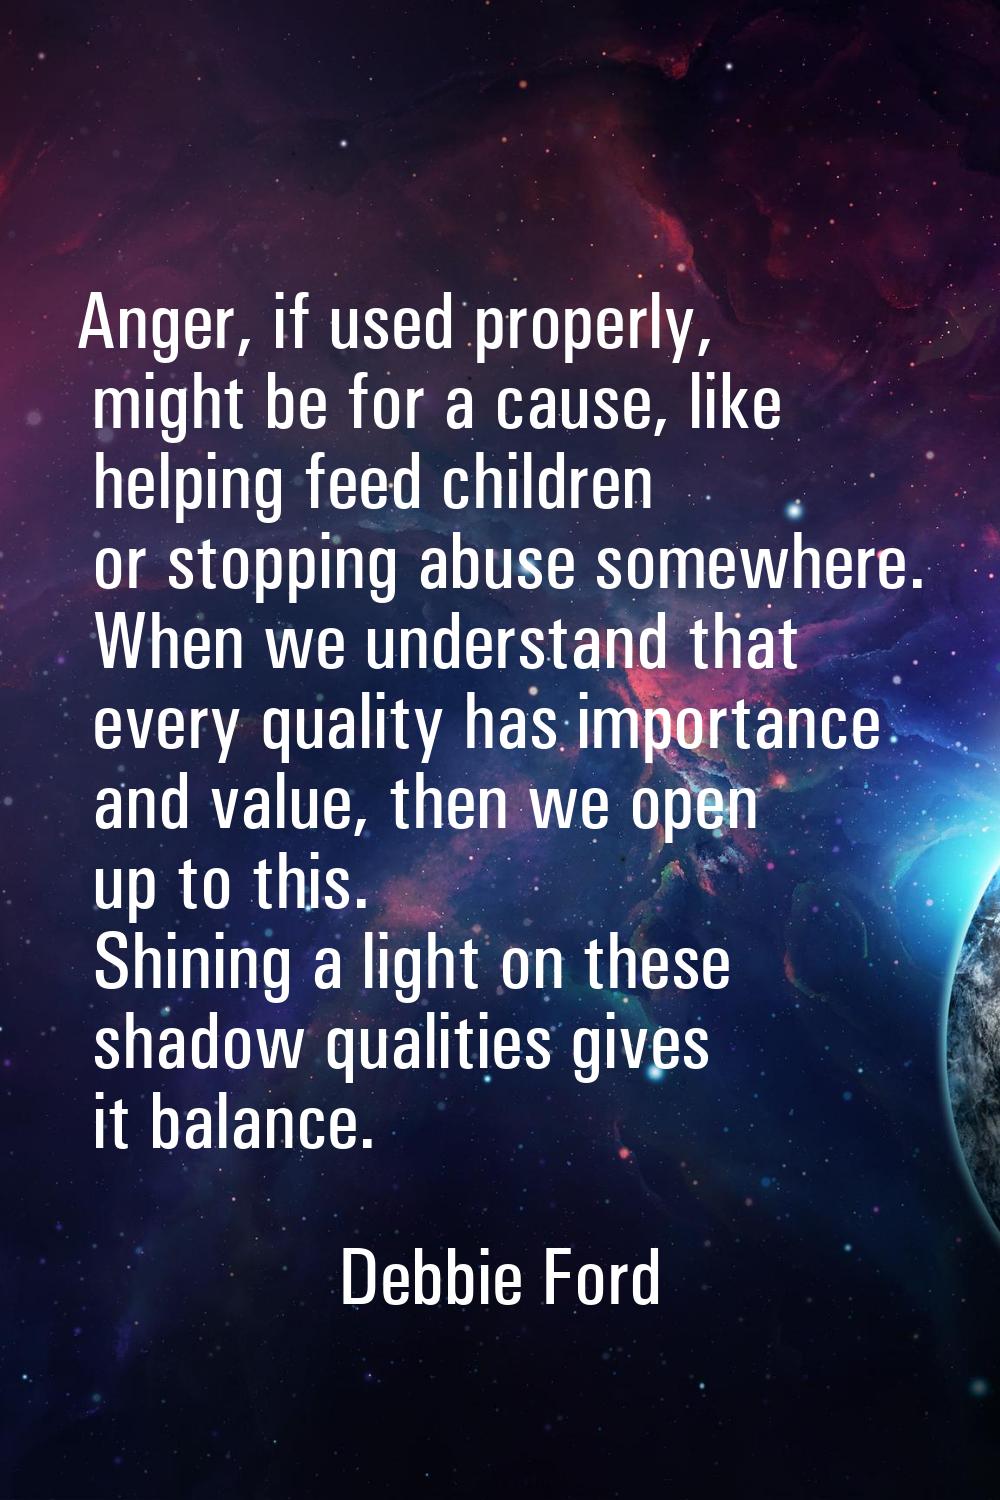 Anger, if used properly, might be for a cause, like helping feed children or stopping abuse somewhe